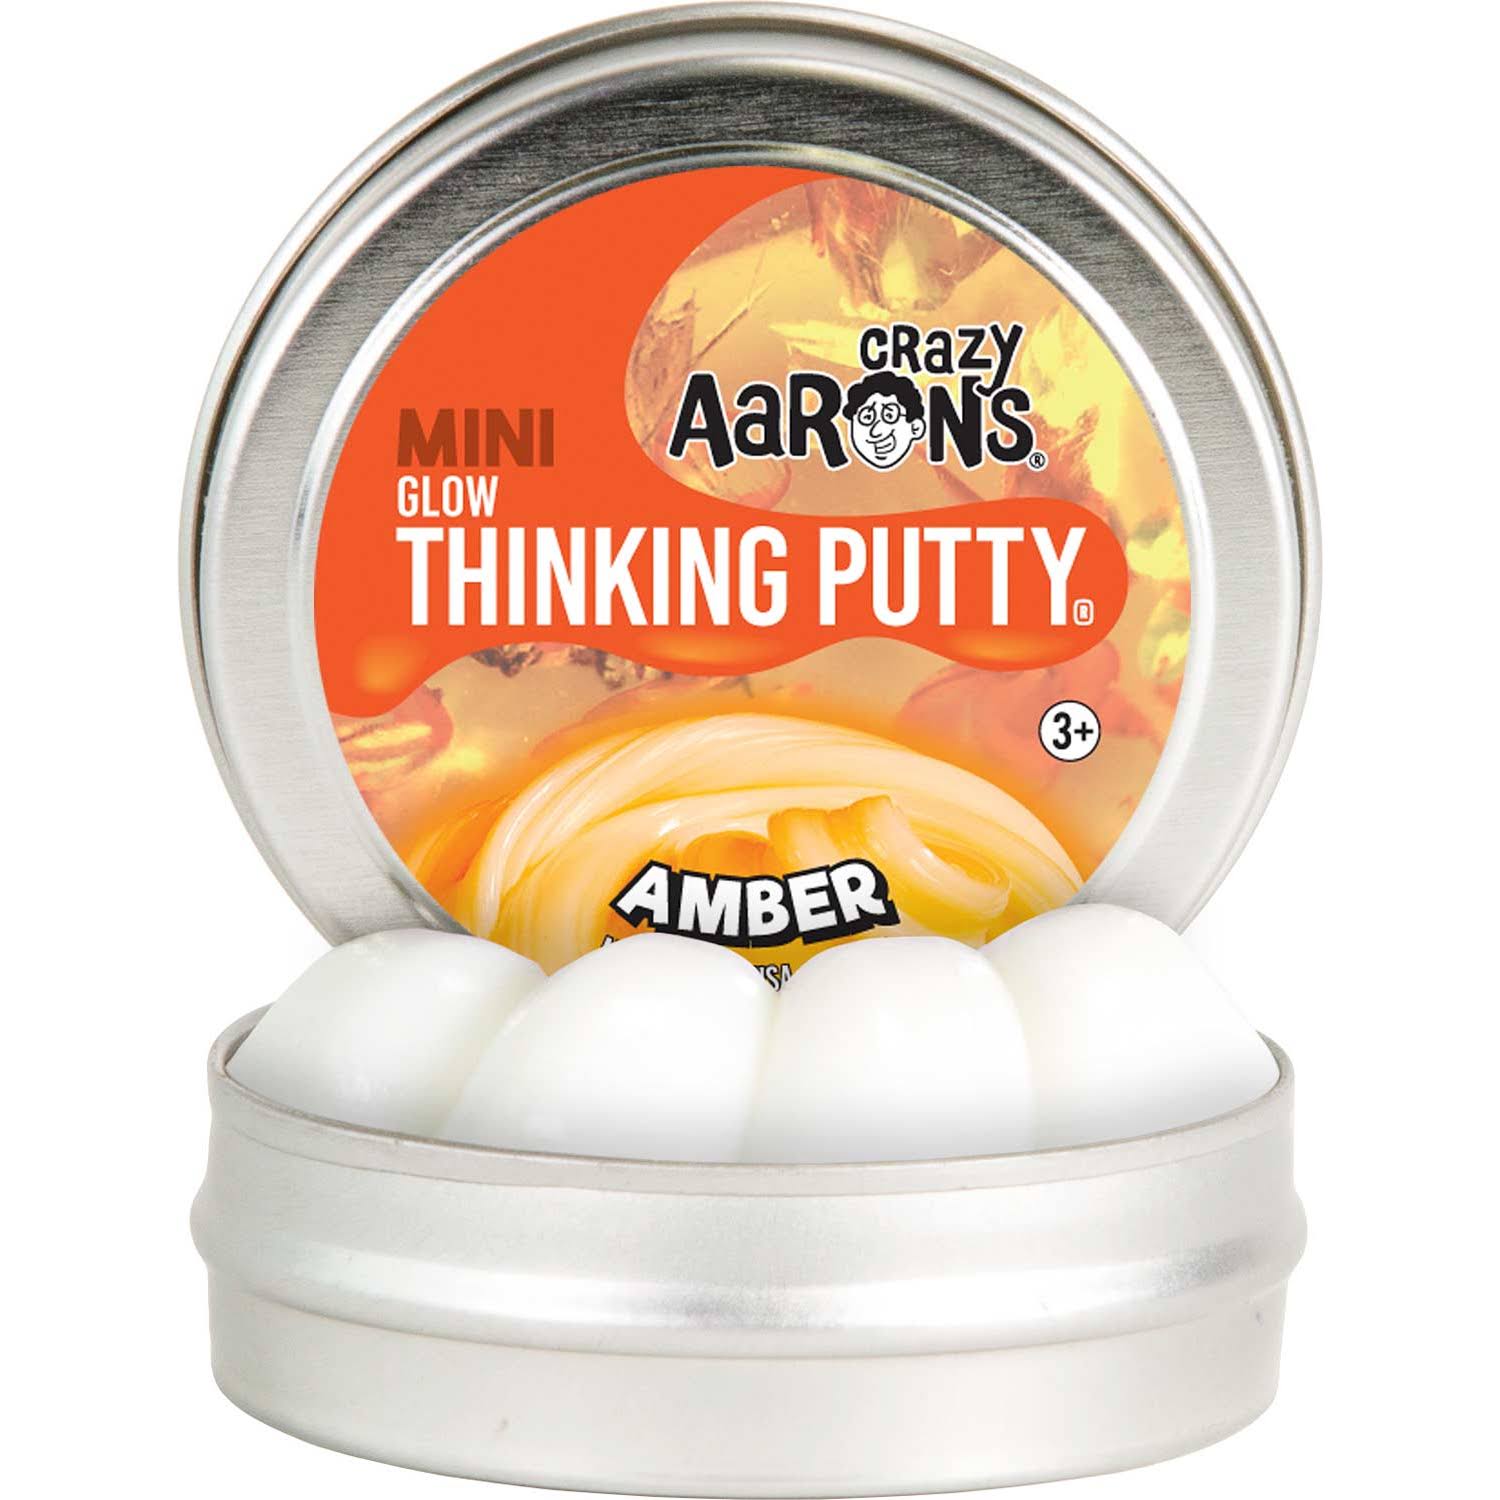 Crazy Aaron's Glow Thinking Putty - Amber